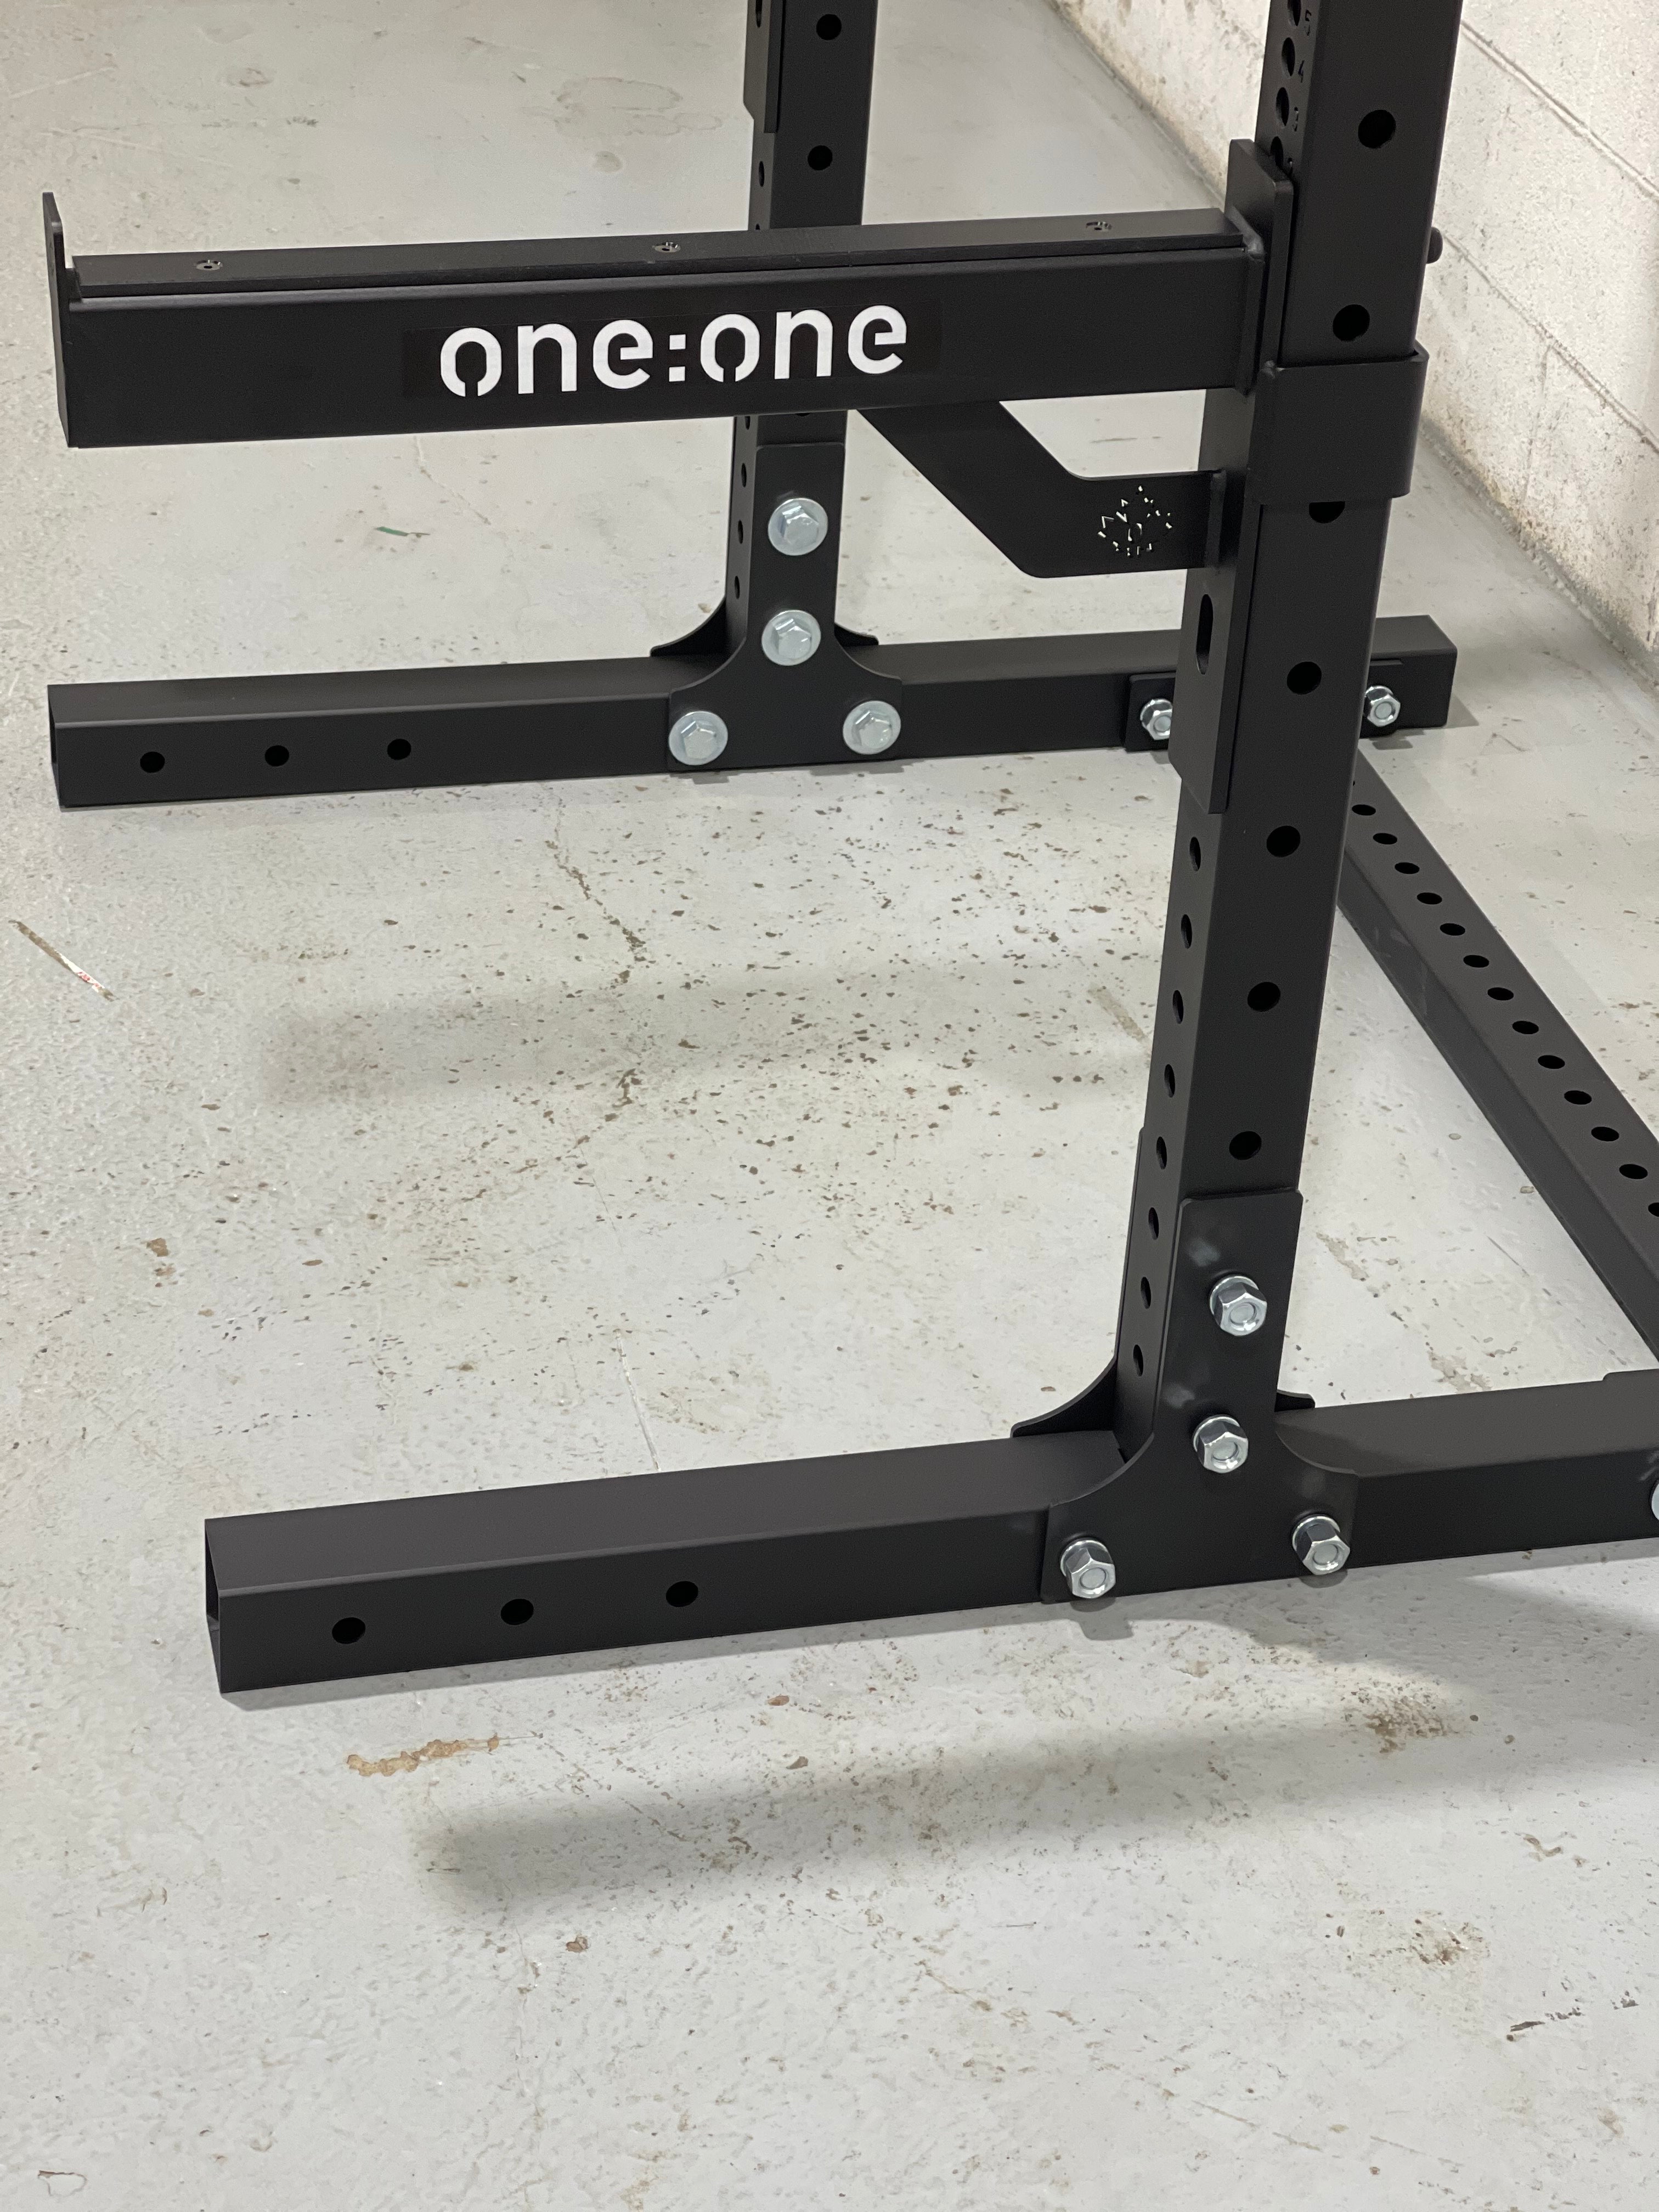 Pictured is our new and improved Safety Arm design, presented on a 3x3 Squat Stand post (sold separately).